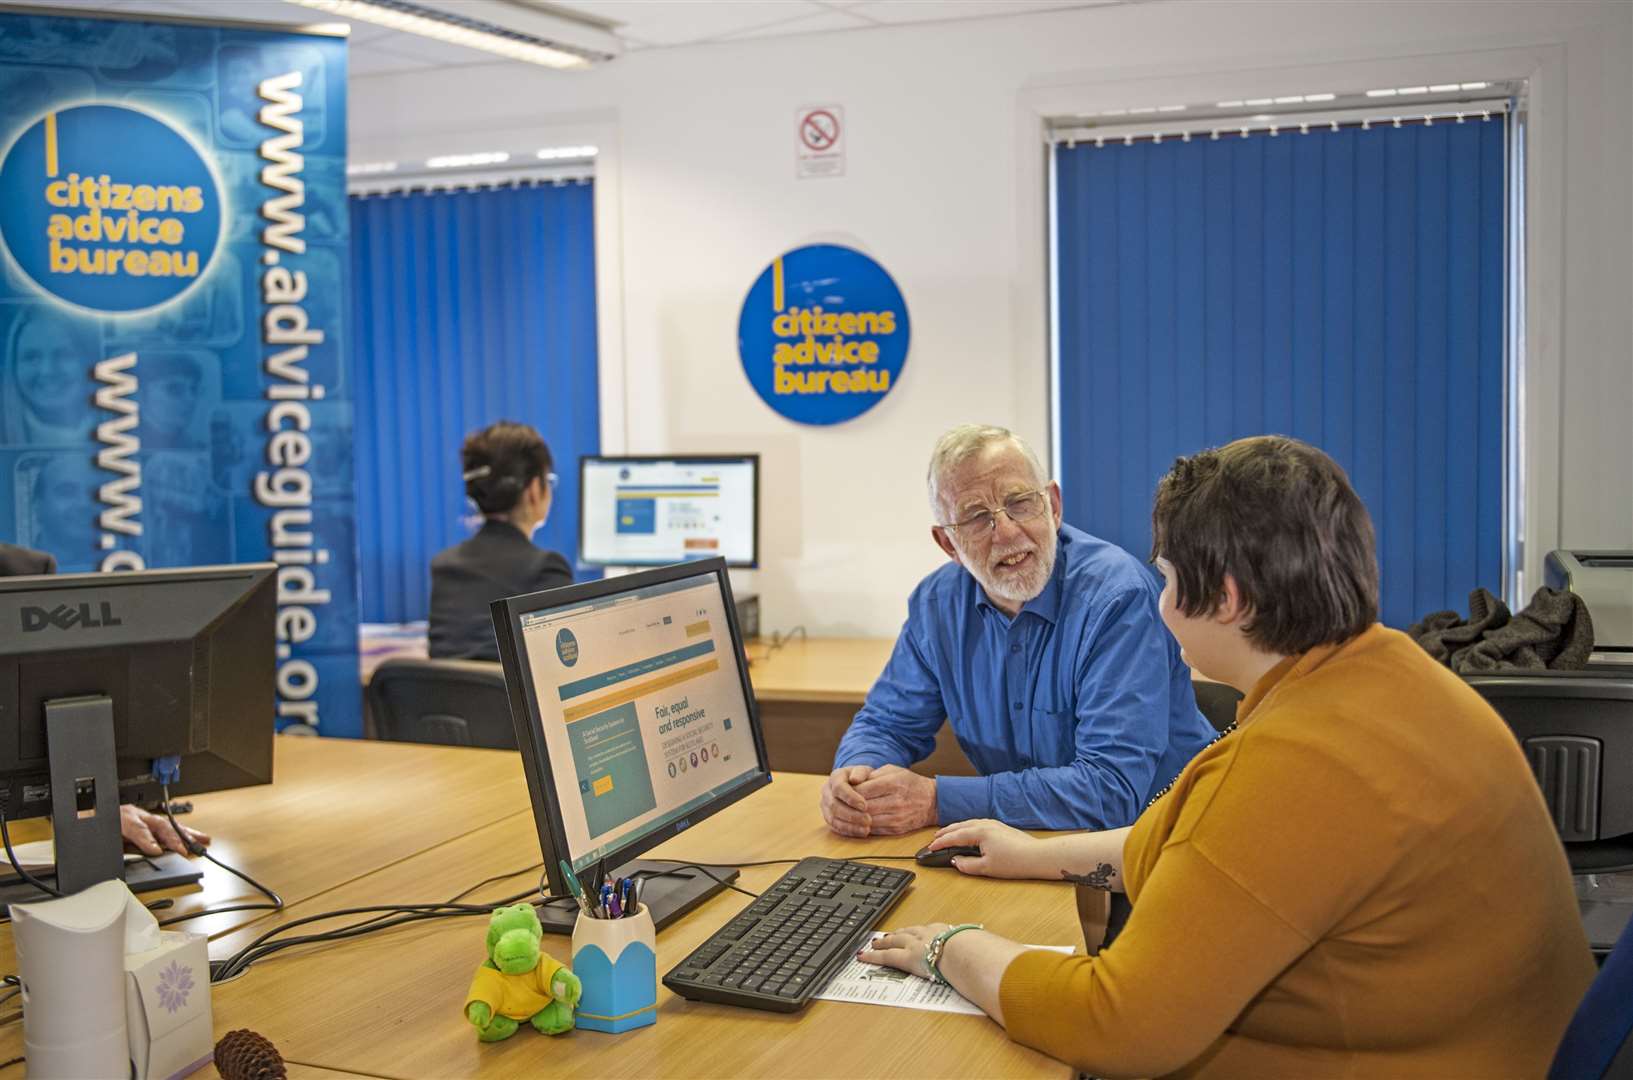 Citizens Advice staff are on hand to provide advice to anyone unsure of their rights.